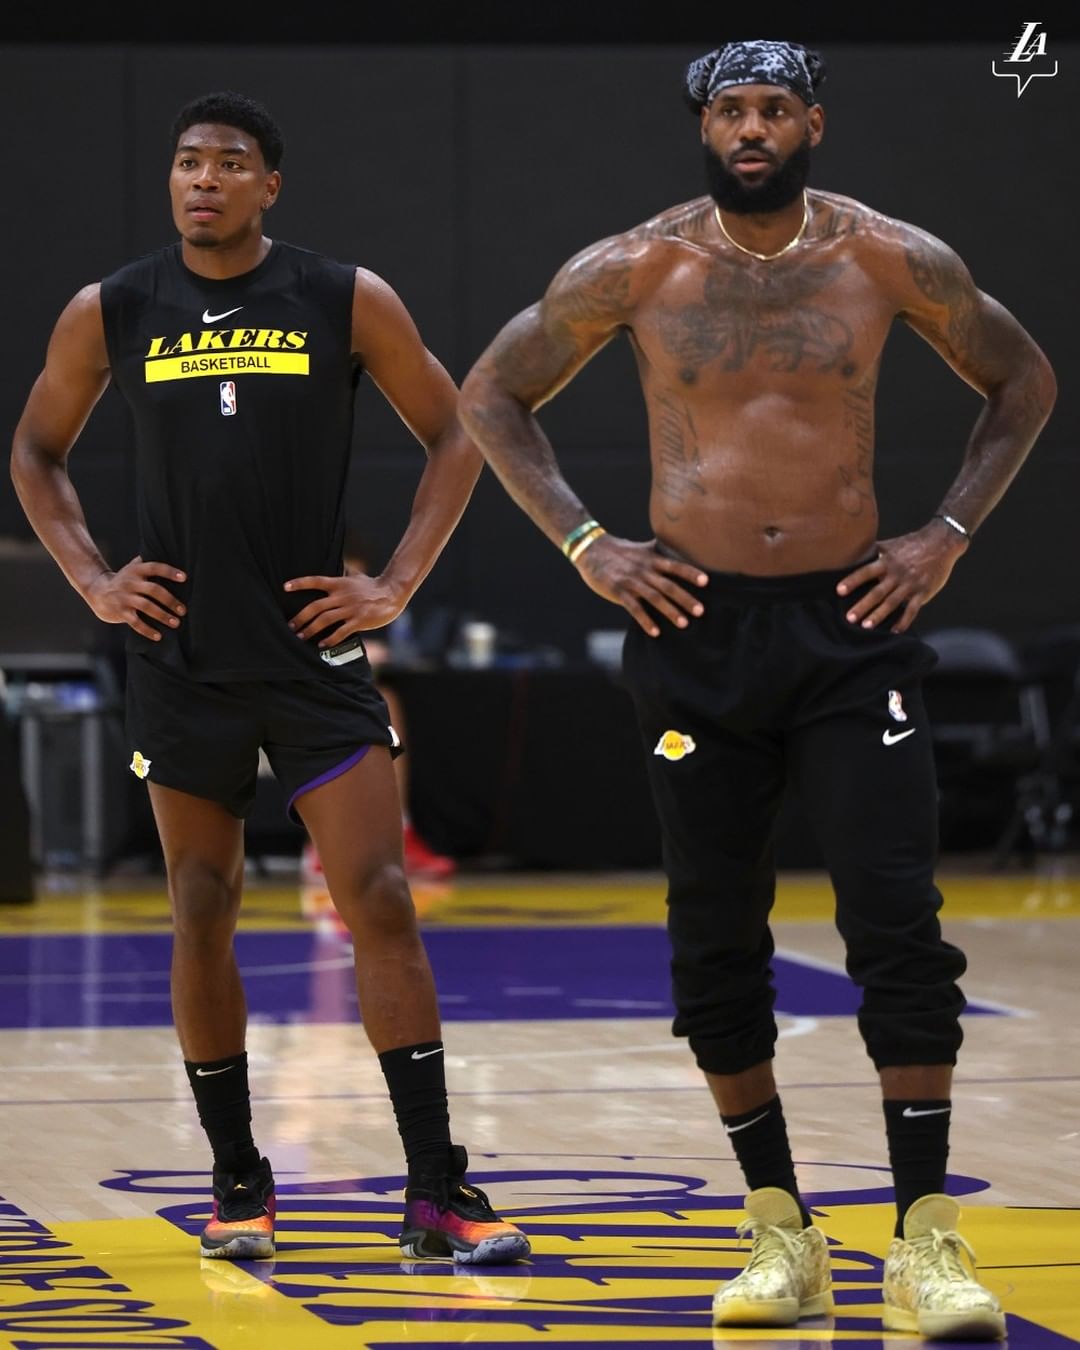 LeBron James and Rui Hachimura show off full energy in training as they're ready for new NBA season